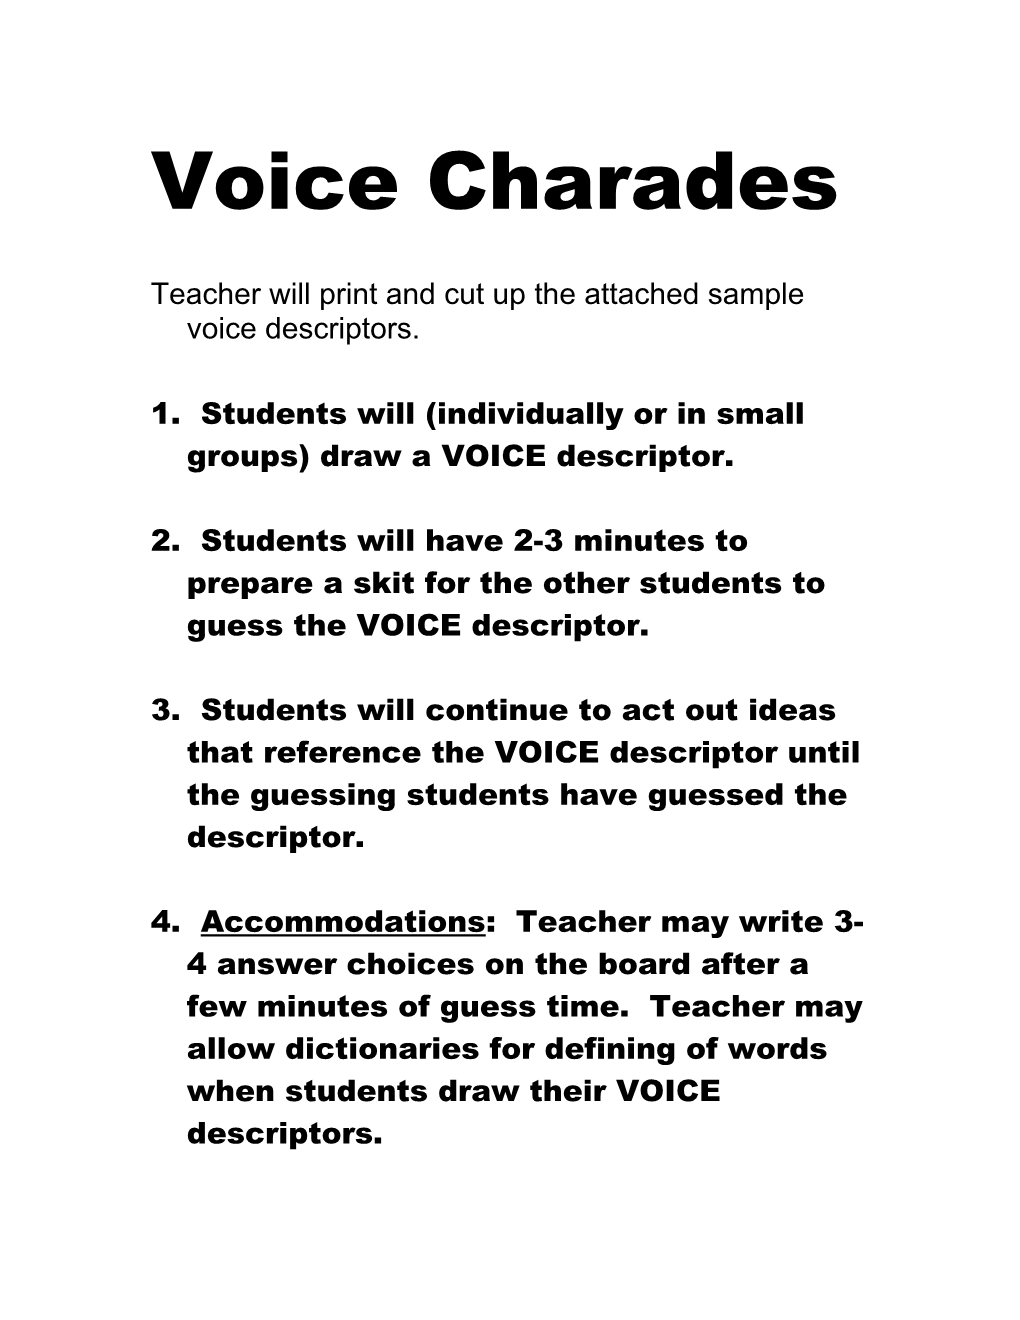 Teacher Will Print and Cut up the Attached Sample Voice Descriptors